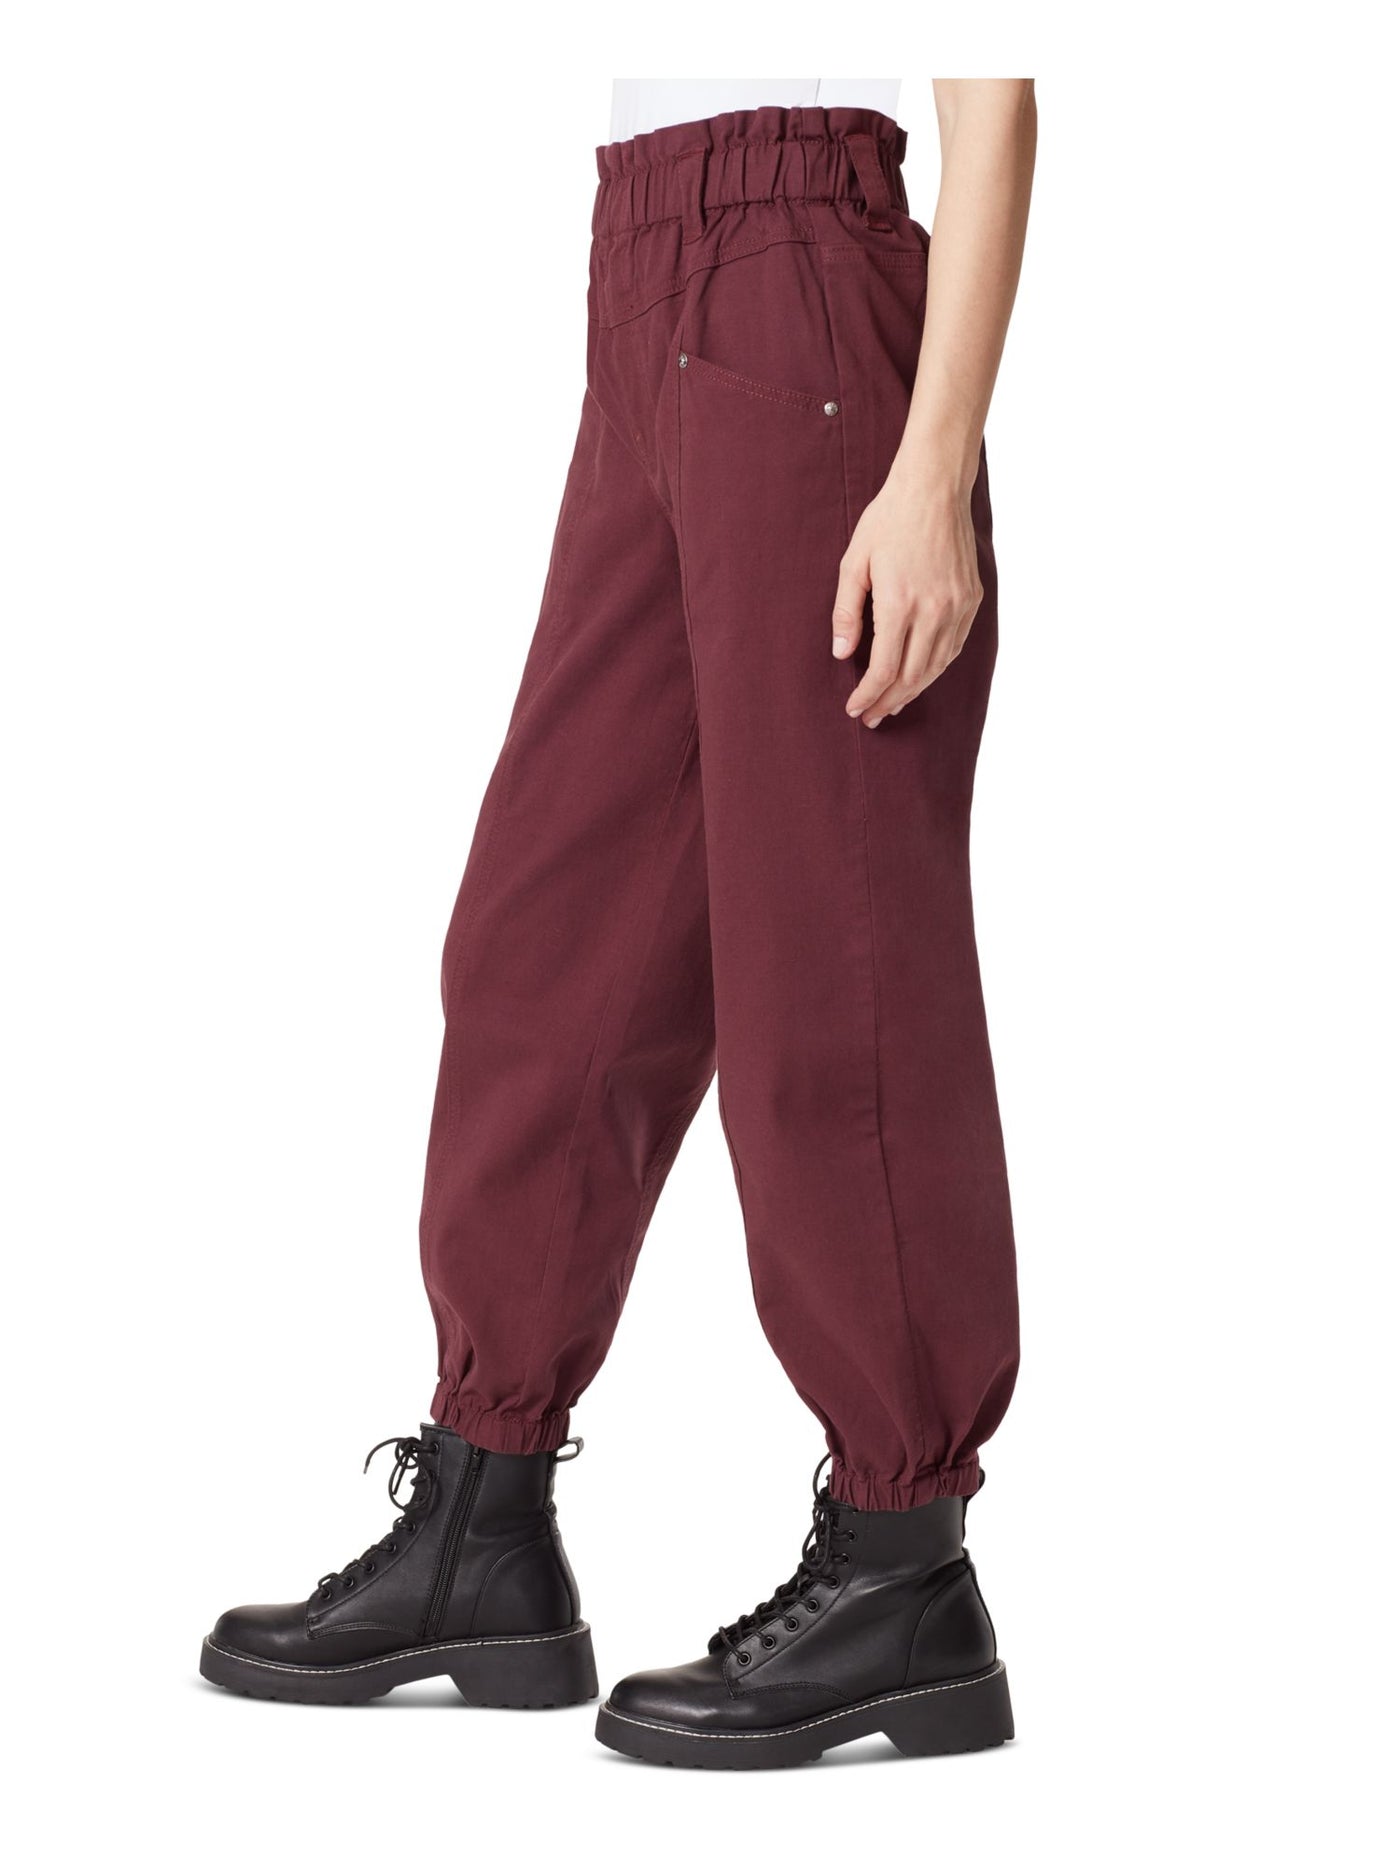 FRAYED Womens Burgundy Pocketed Paper Bag-gy Elastic Waist Cuffed Pants 30